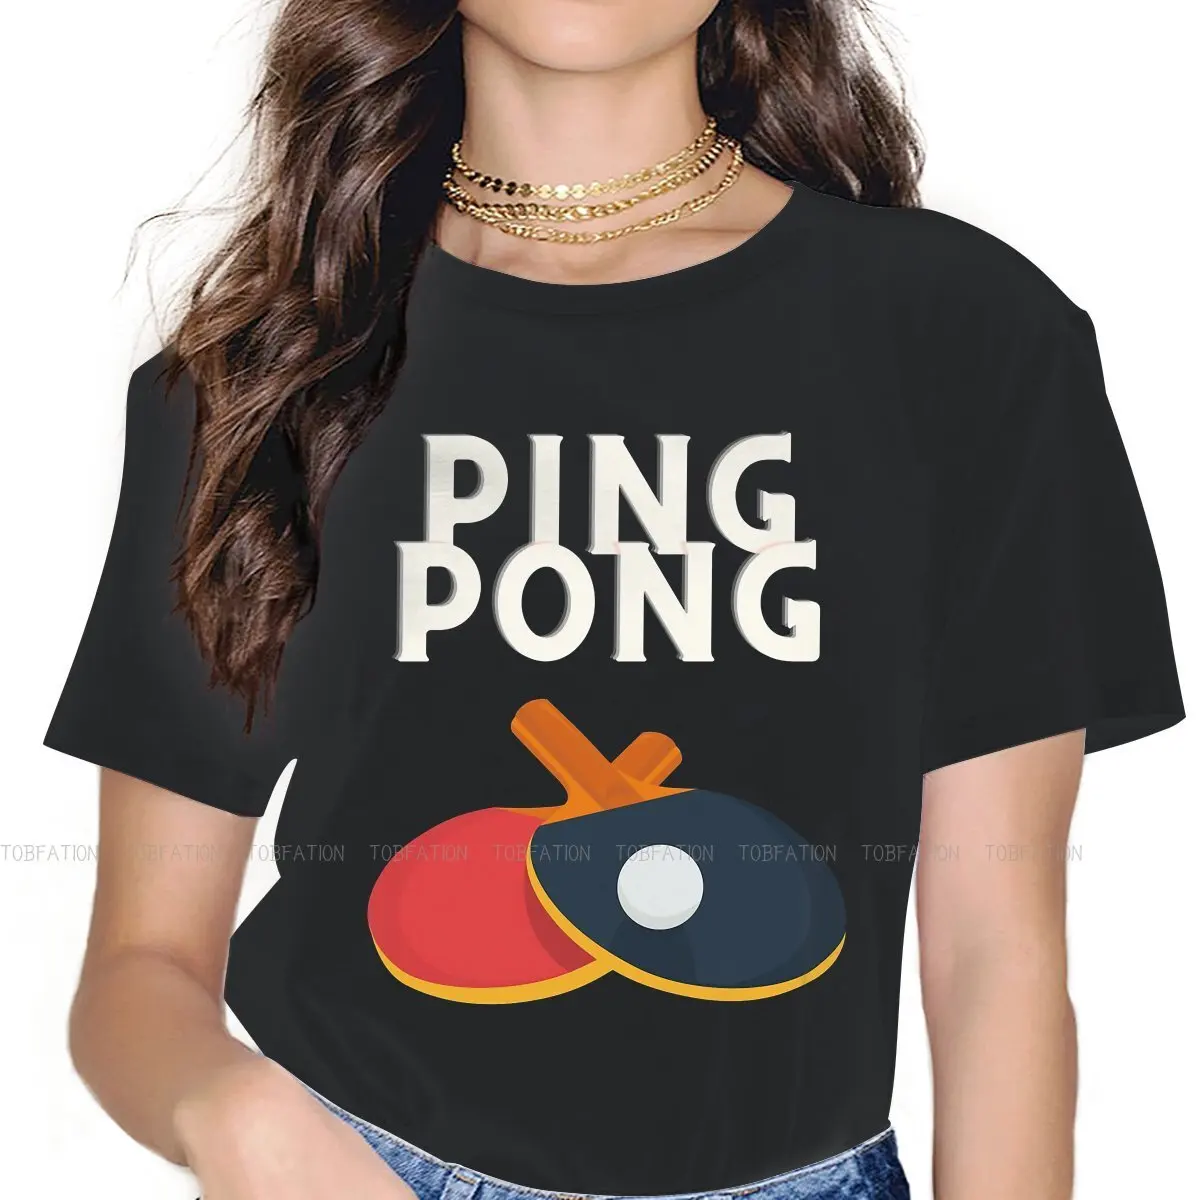 

Ping-Pong Table Tennis Sports Lover Gift TShirt for Woman Girl Pingpong Image 4XL Summer Tee T Shirt High Quality Fluffy